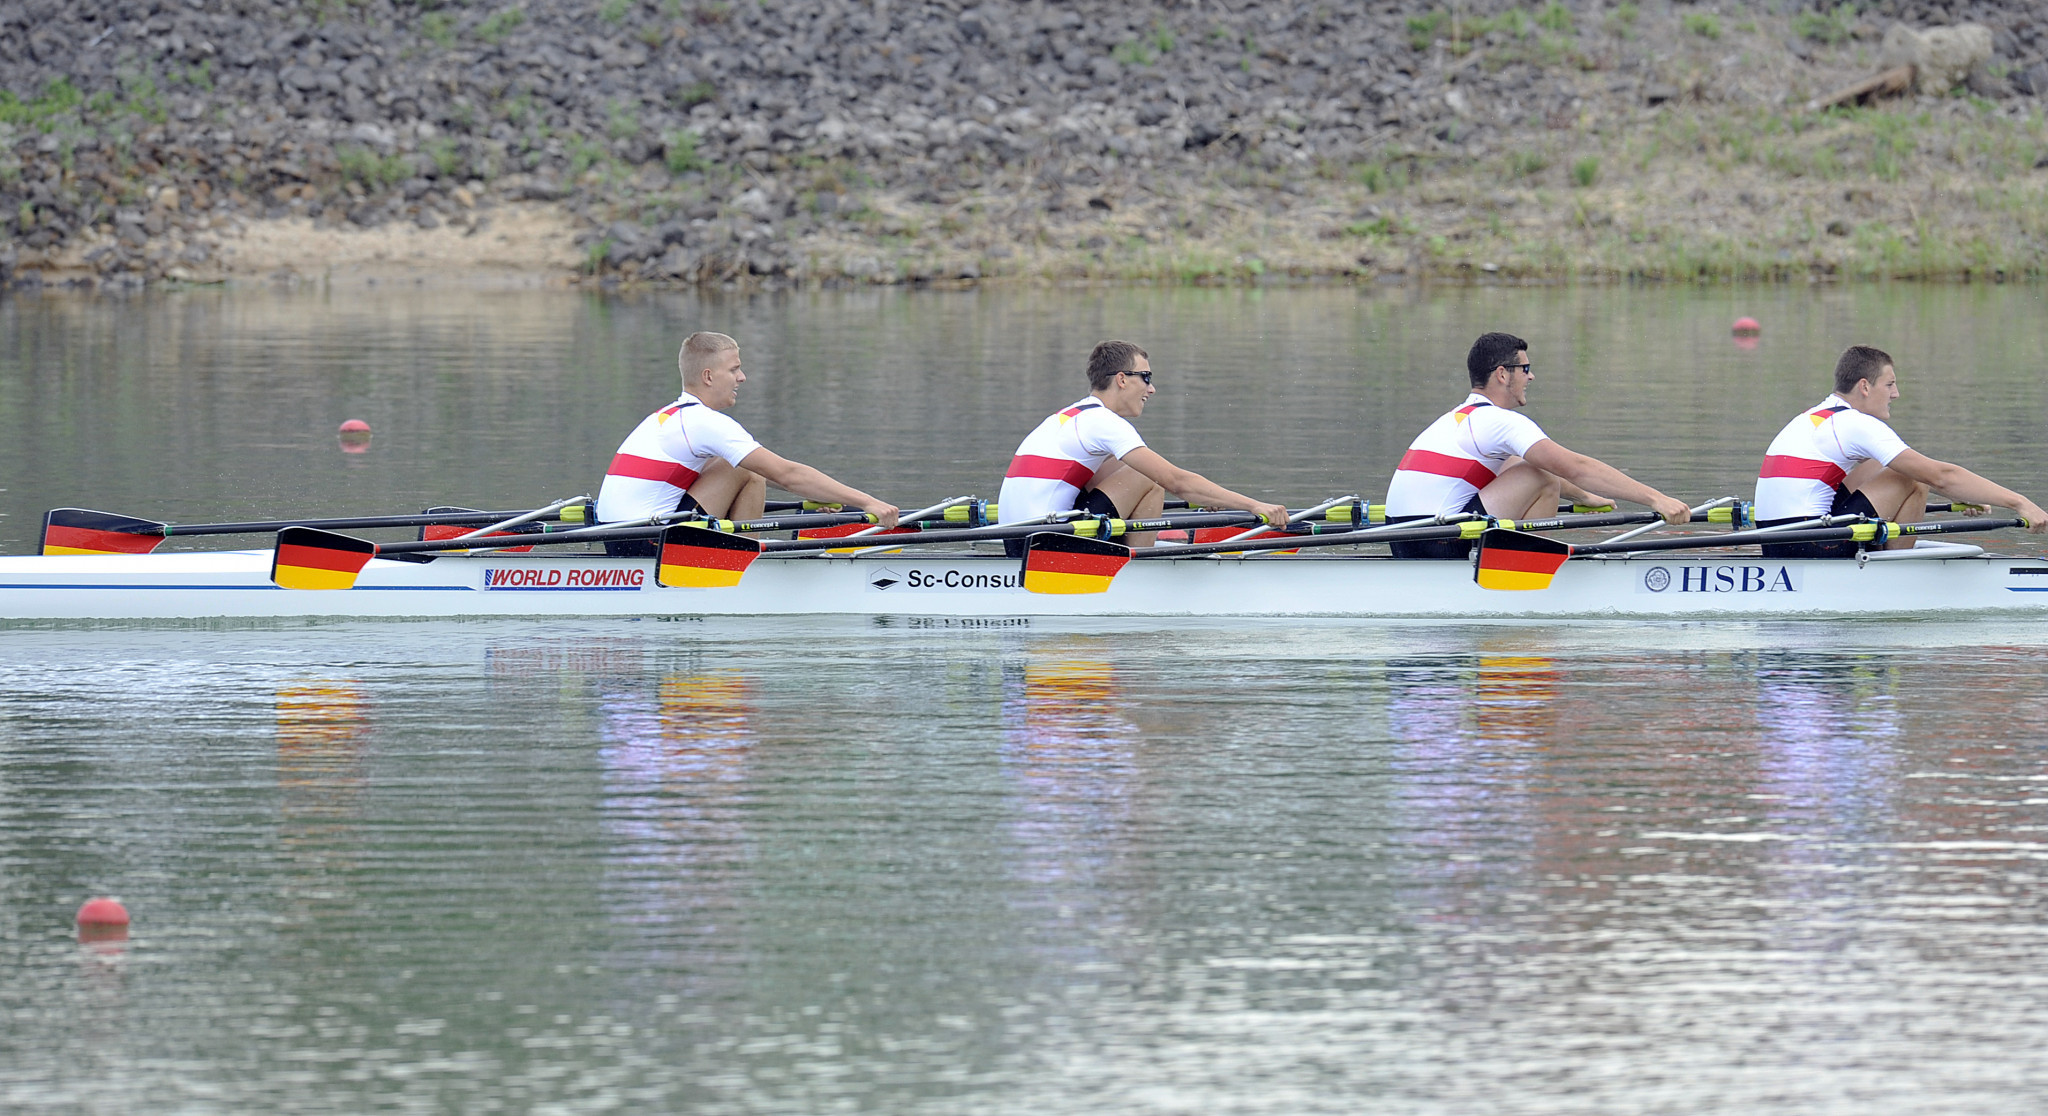  Račice has hosted a number of major rowing events ©Getty Images